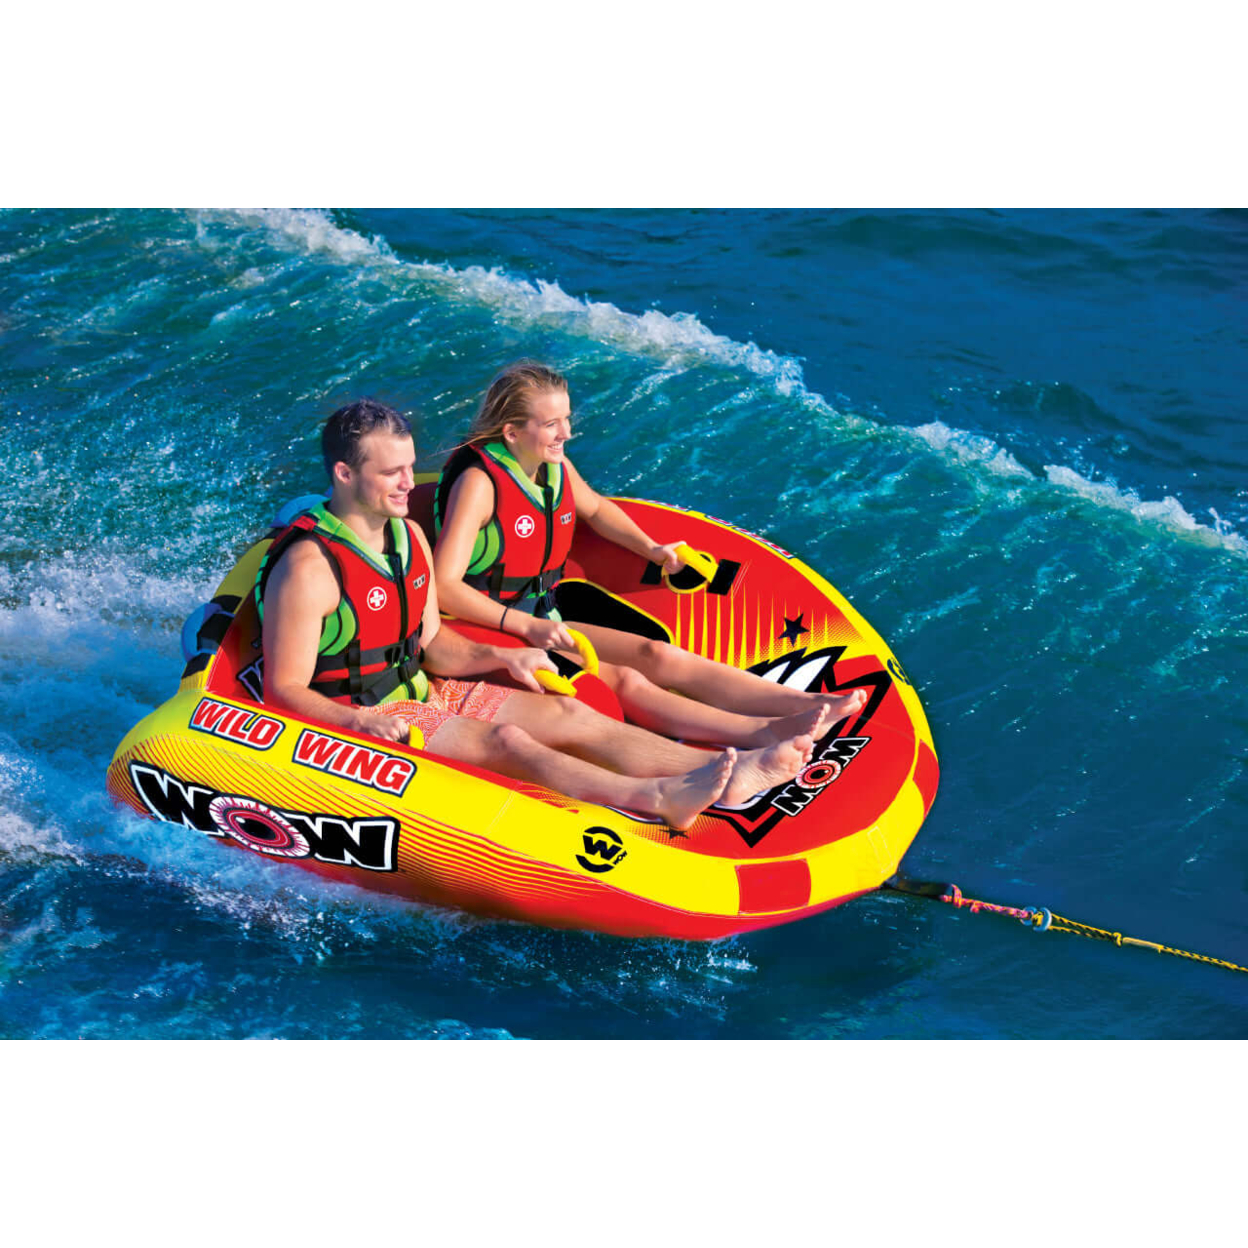 WOW Sports Wild Wing 2 Person Towable Water Tube For Pool And Lake (18-1120)